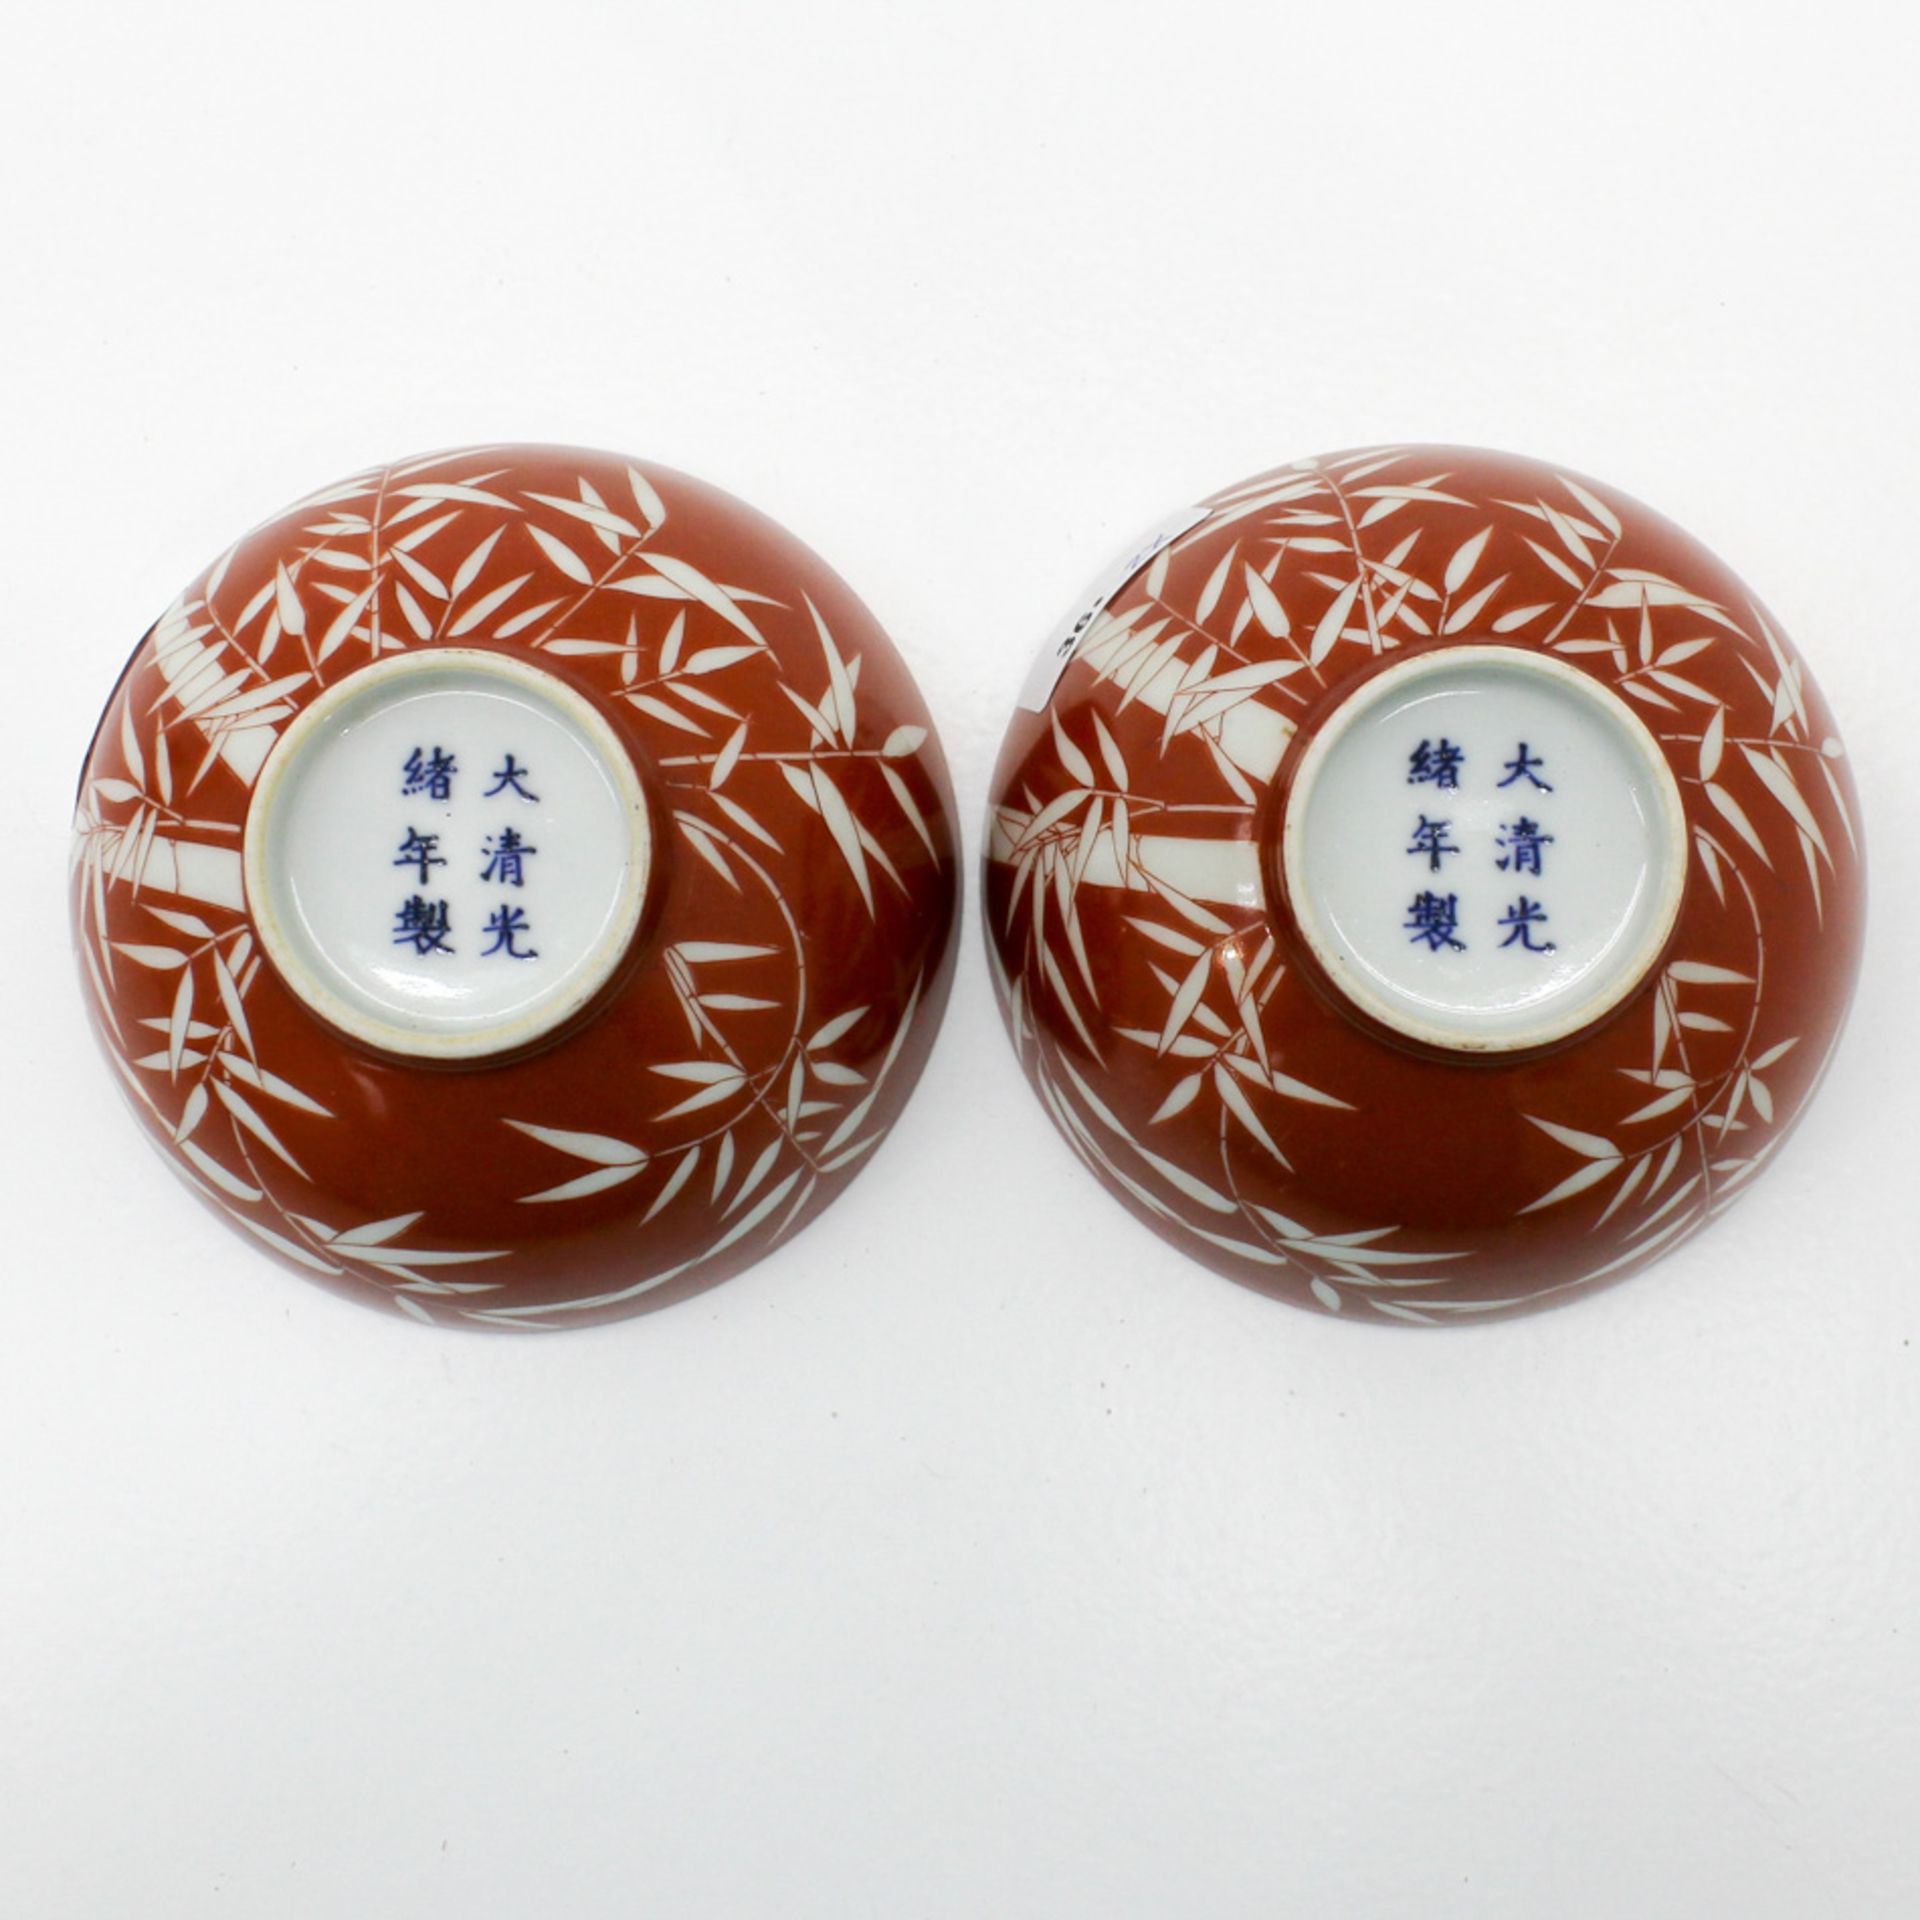 Lot of 2 China Porcelain Small Bowls Marked with 6 characters Guangxu 1874-1908, depicting bamboo - Bild 5 aus 6